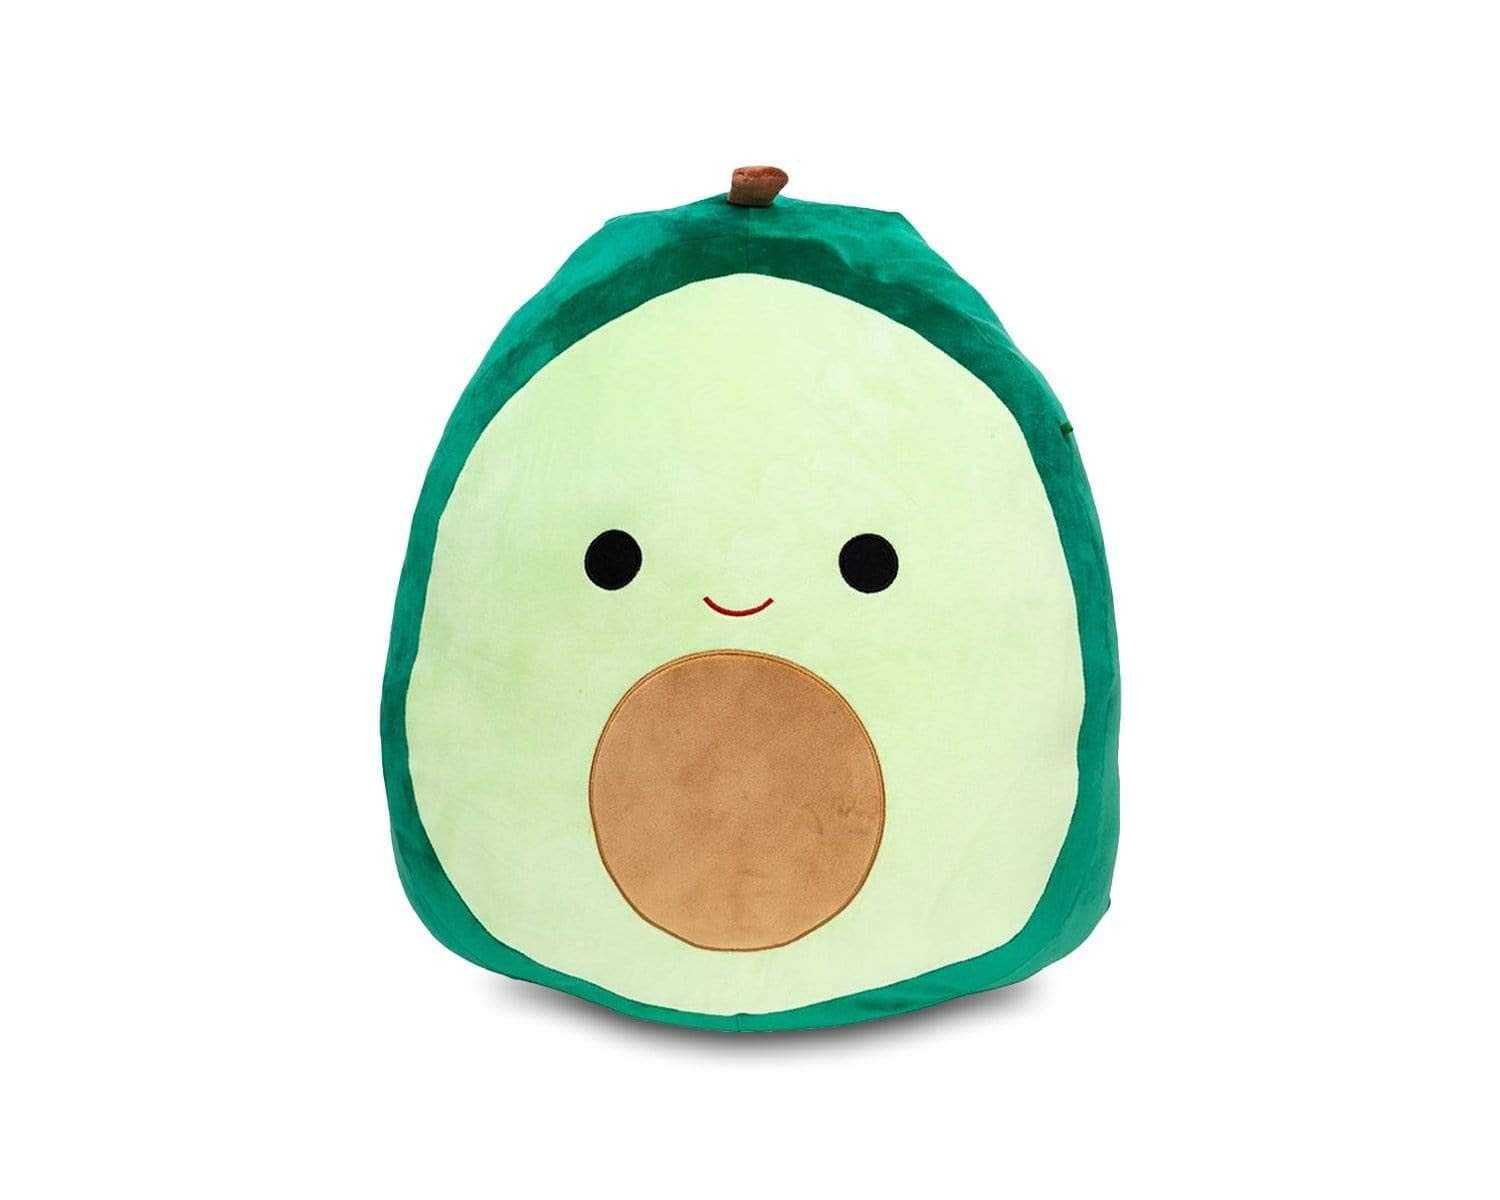 SHOP: Squishmallows are the hottest toys of the season so far